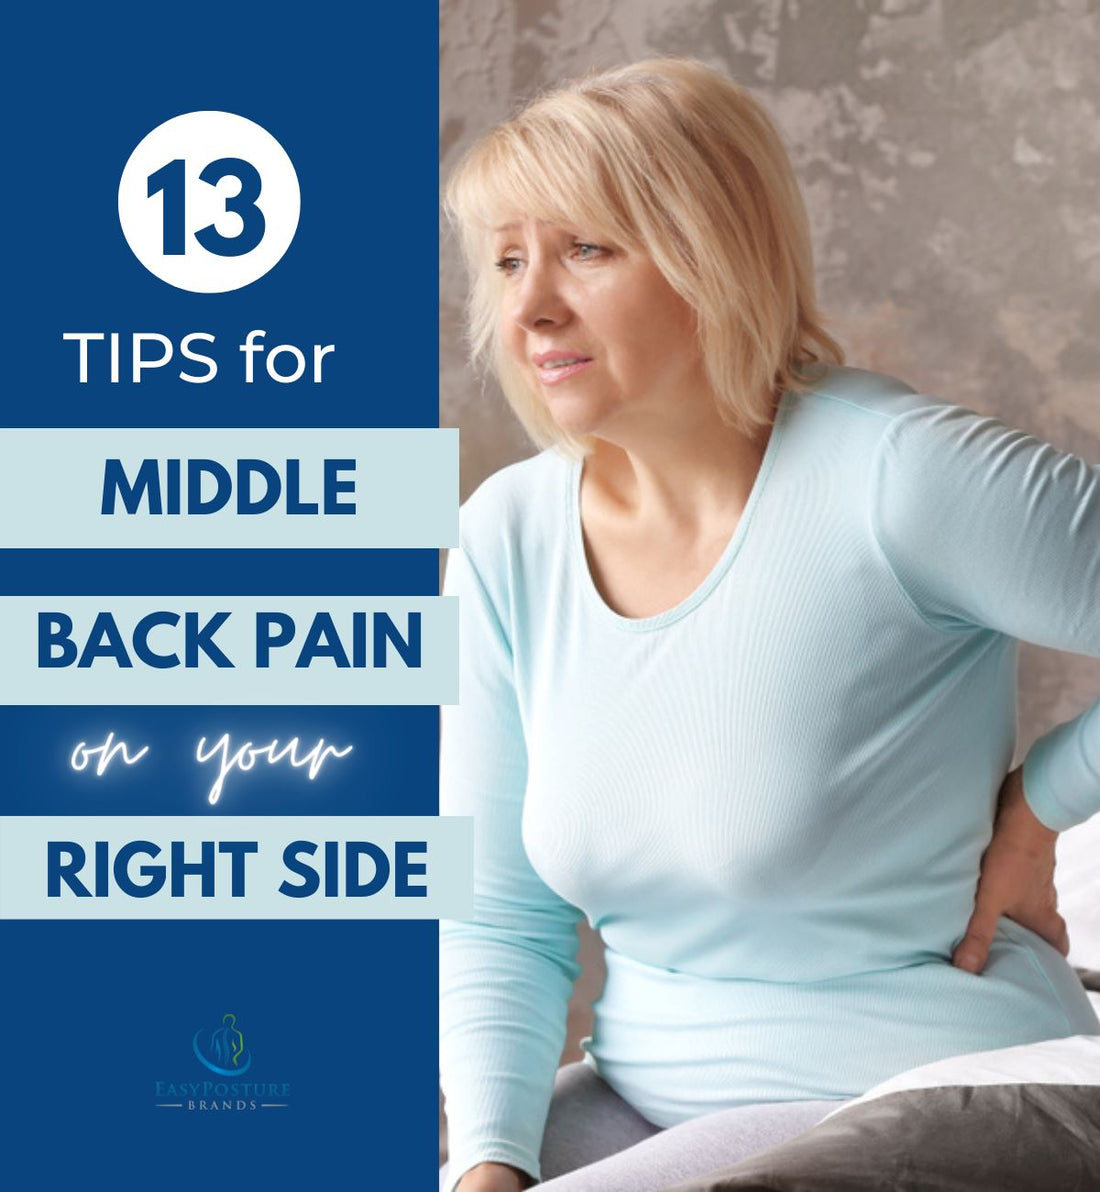 13 Tips for Middle Back Pain on Right Side (in Females) – Easy Posture  Brands